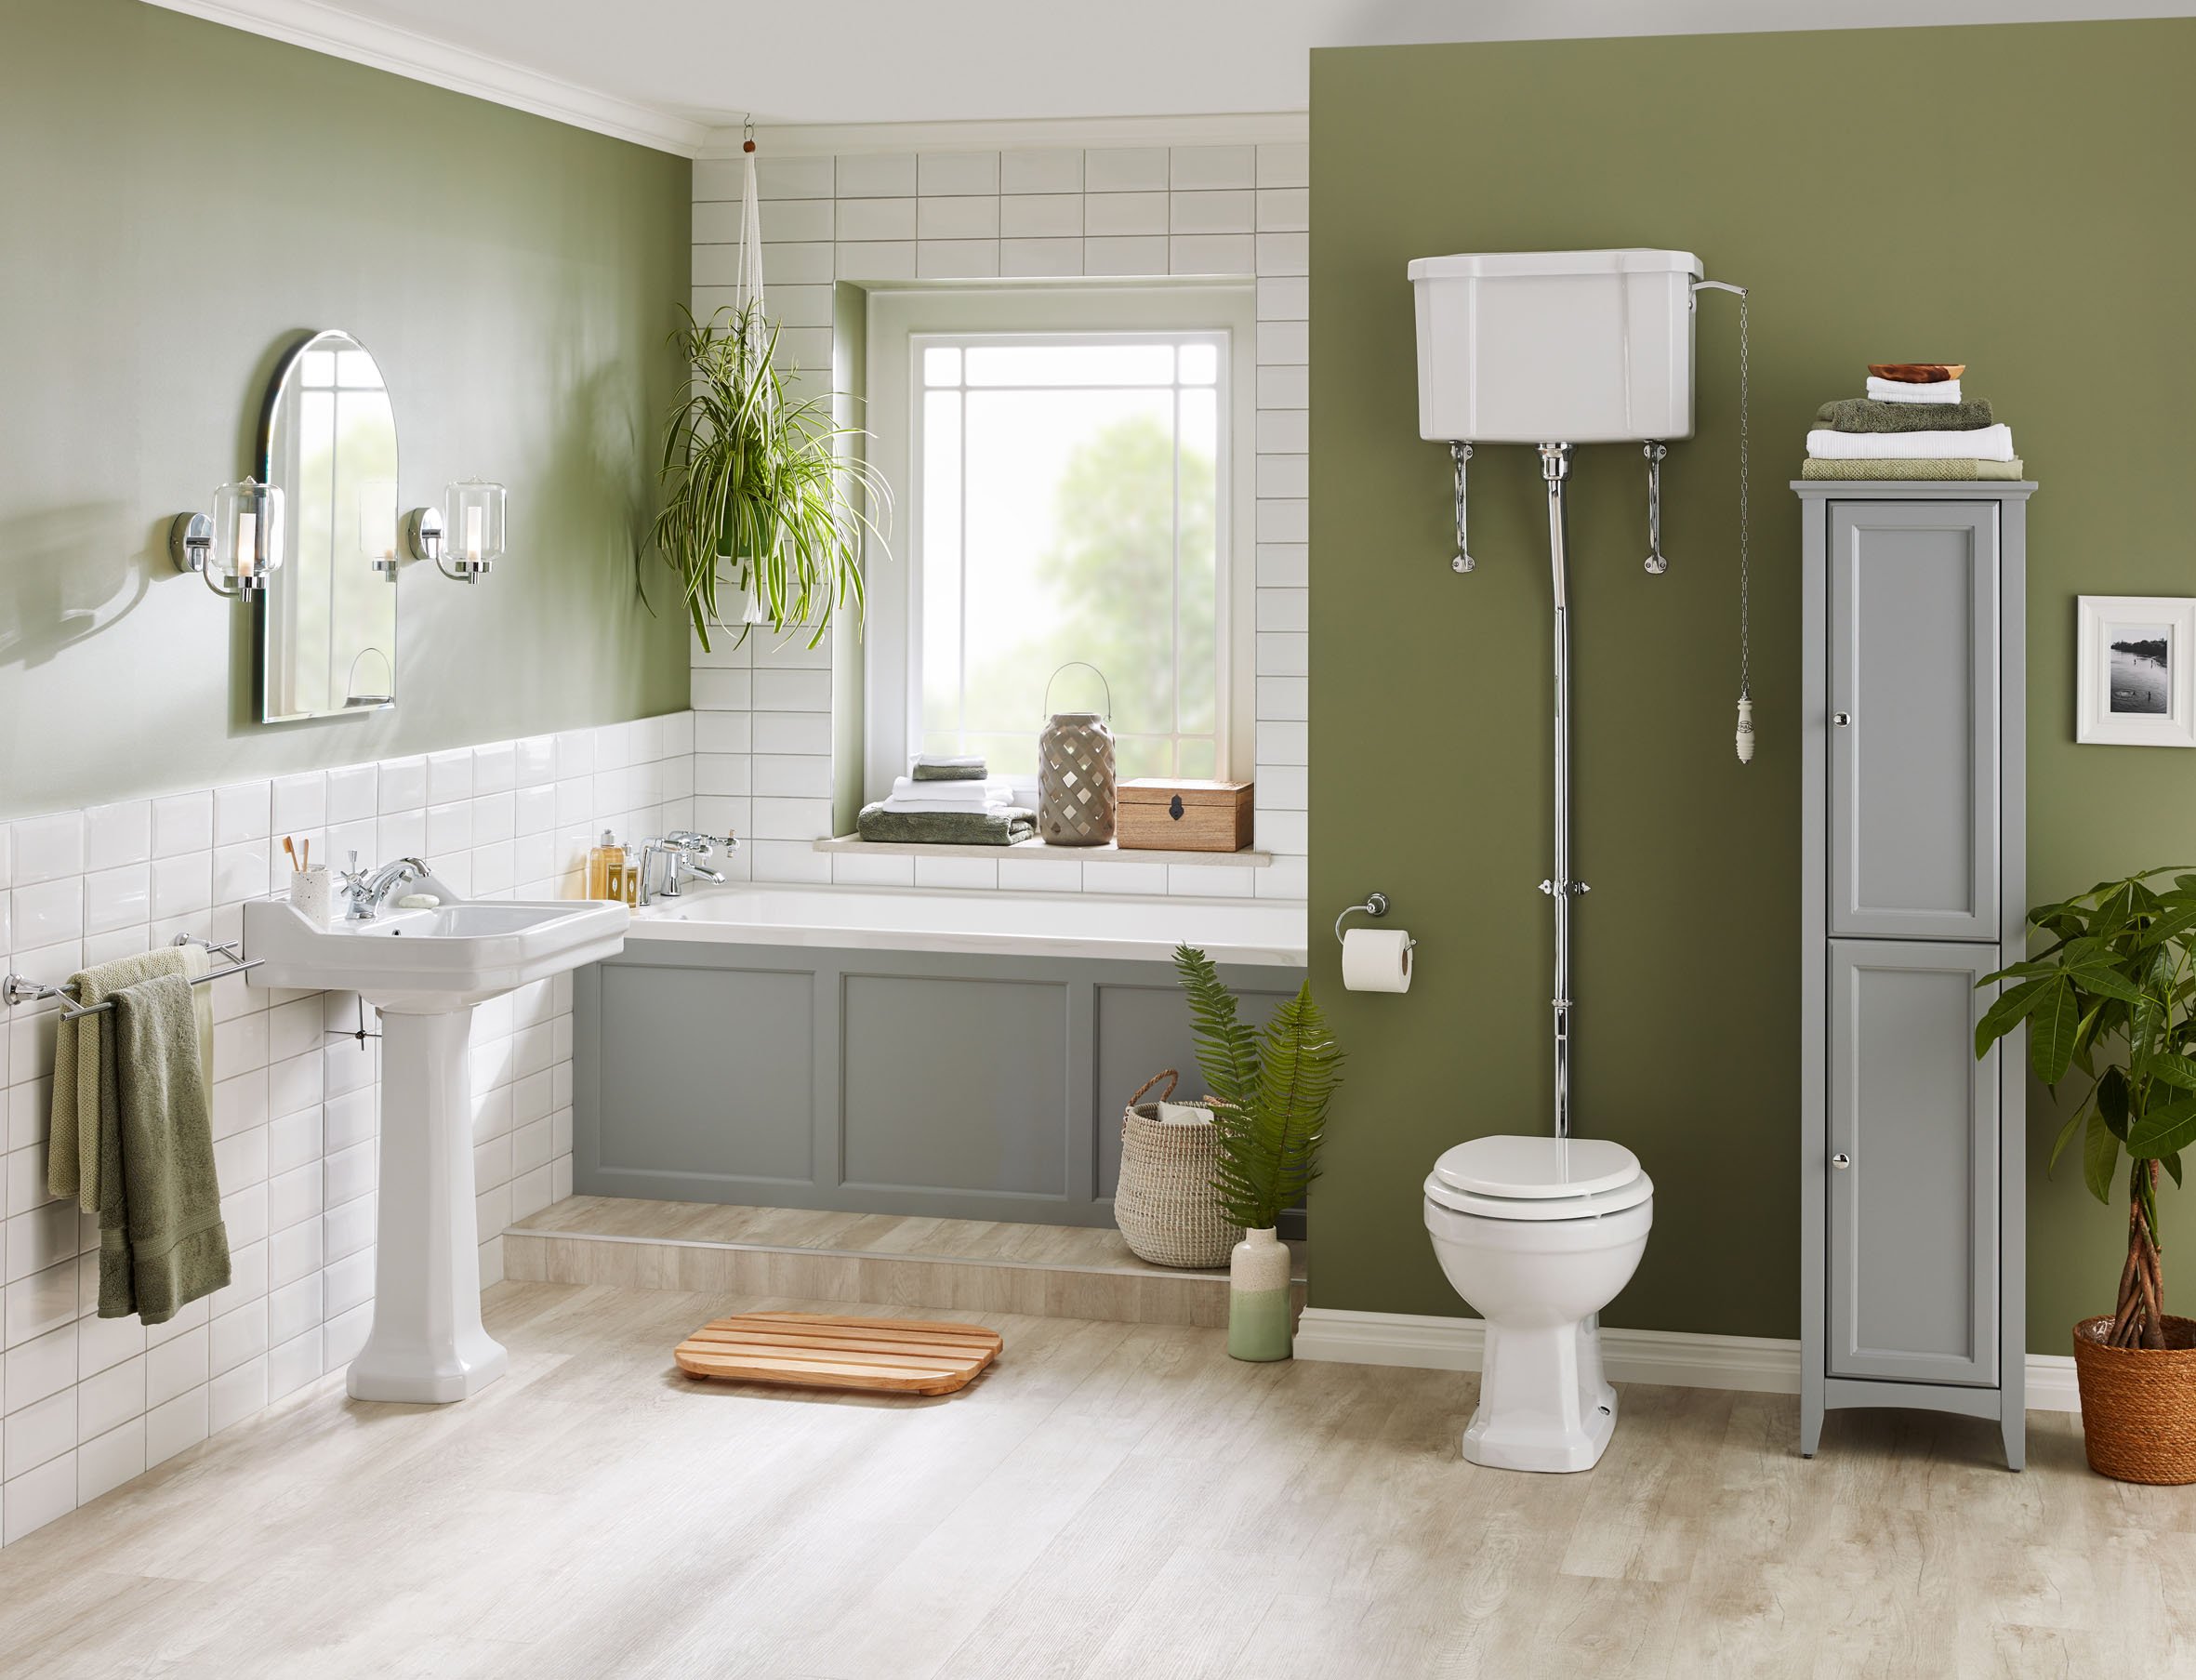 Design Ideas for a Country-Style Bathroom